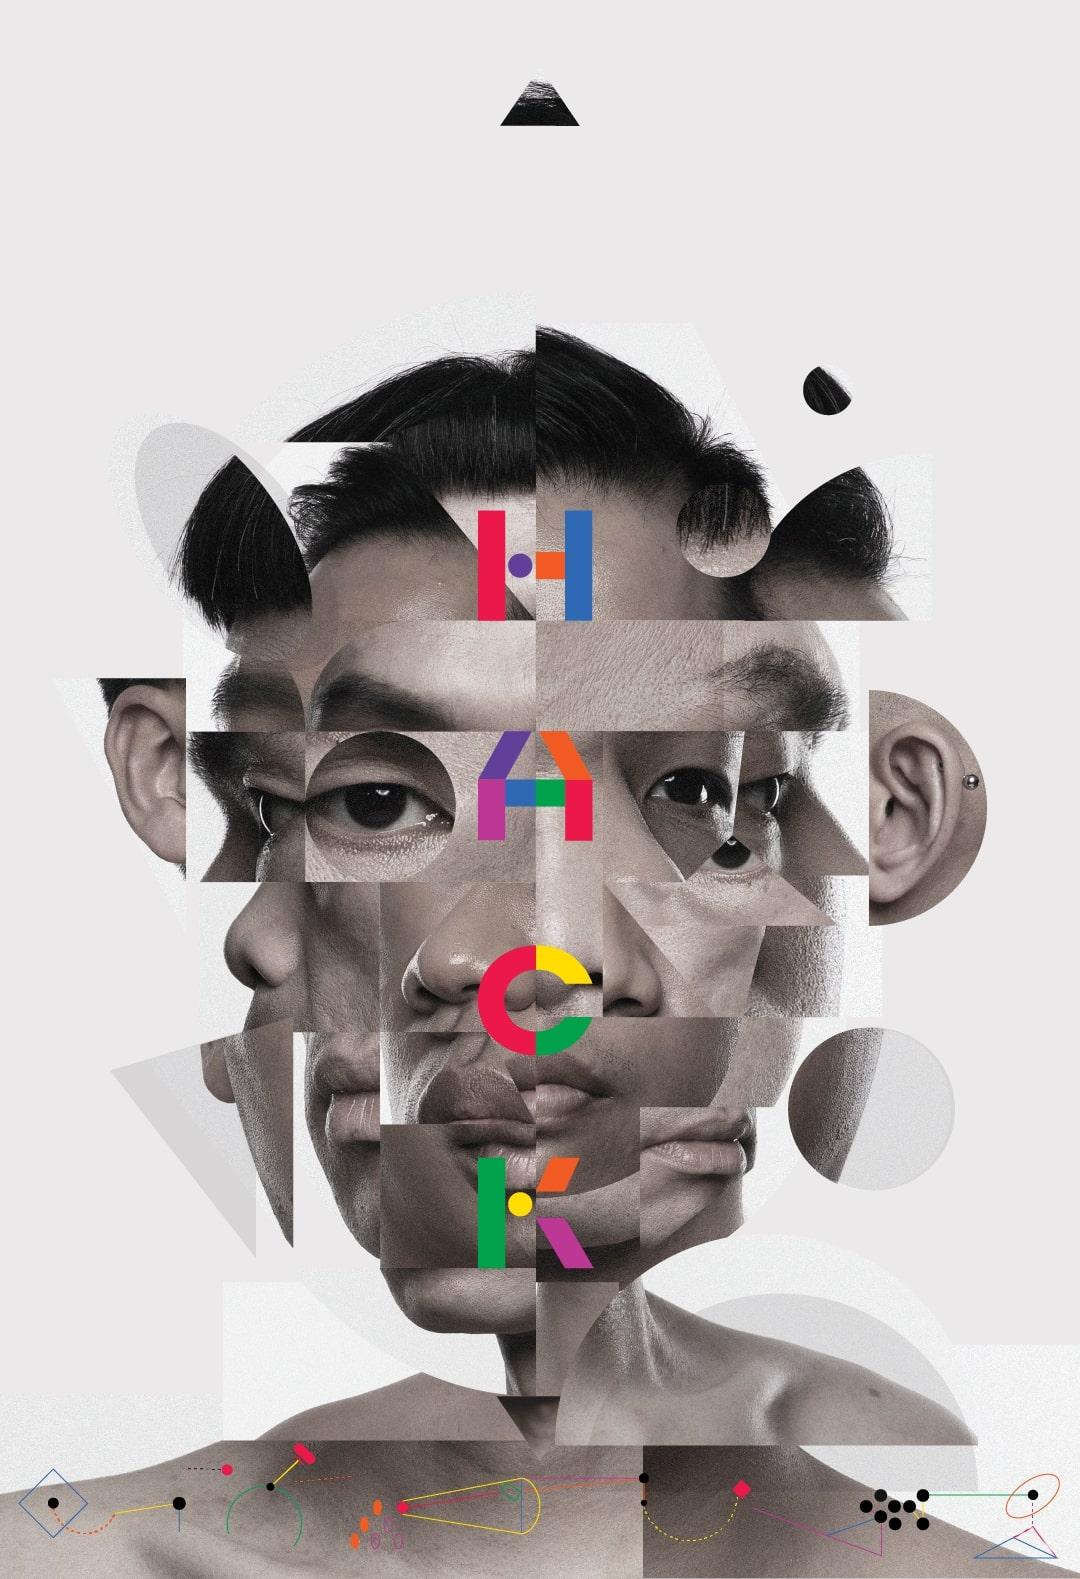 The New Vision Arts Festival will present a multi-arts production, "HACK", created by media artist GayBird and theatre director Ata Wong from November 4 to 6 at the Studio Theatre of the Hong Kong Cultural Centre, enabling audiences to explore the intricate relations between machines and humans.